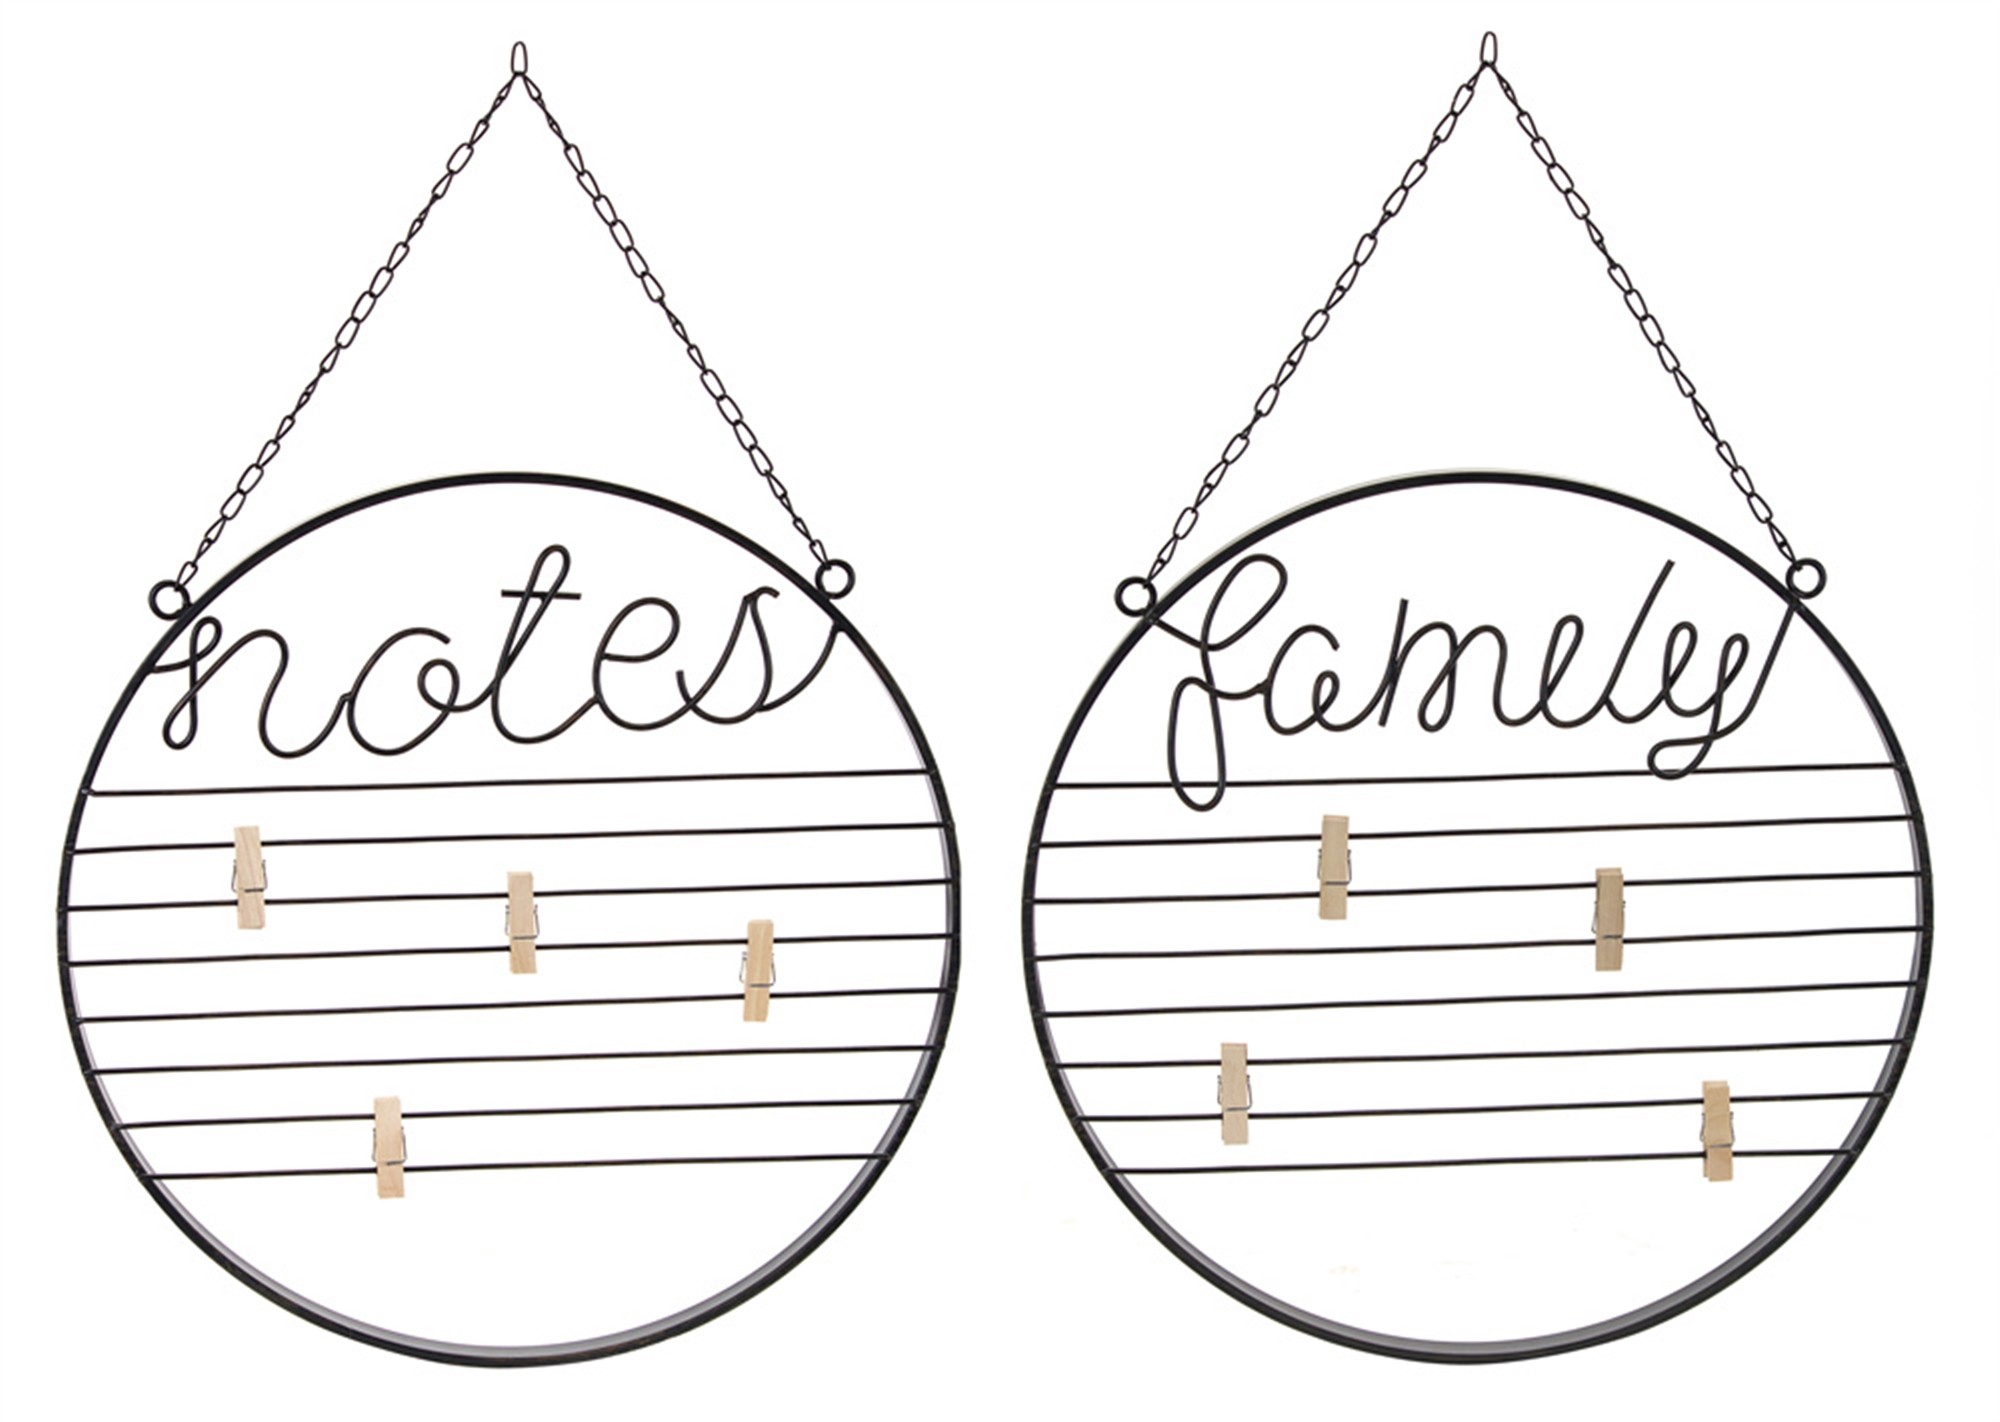 Family/Notes Board (Set of 2) 15.75"D Iron